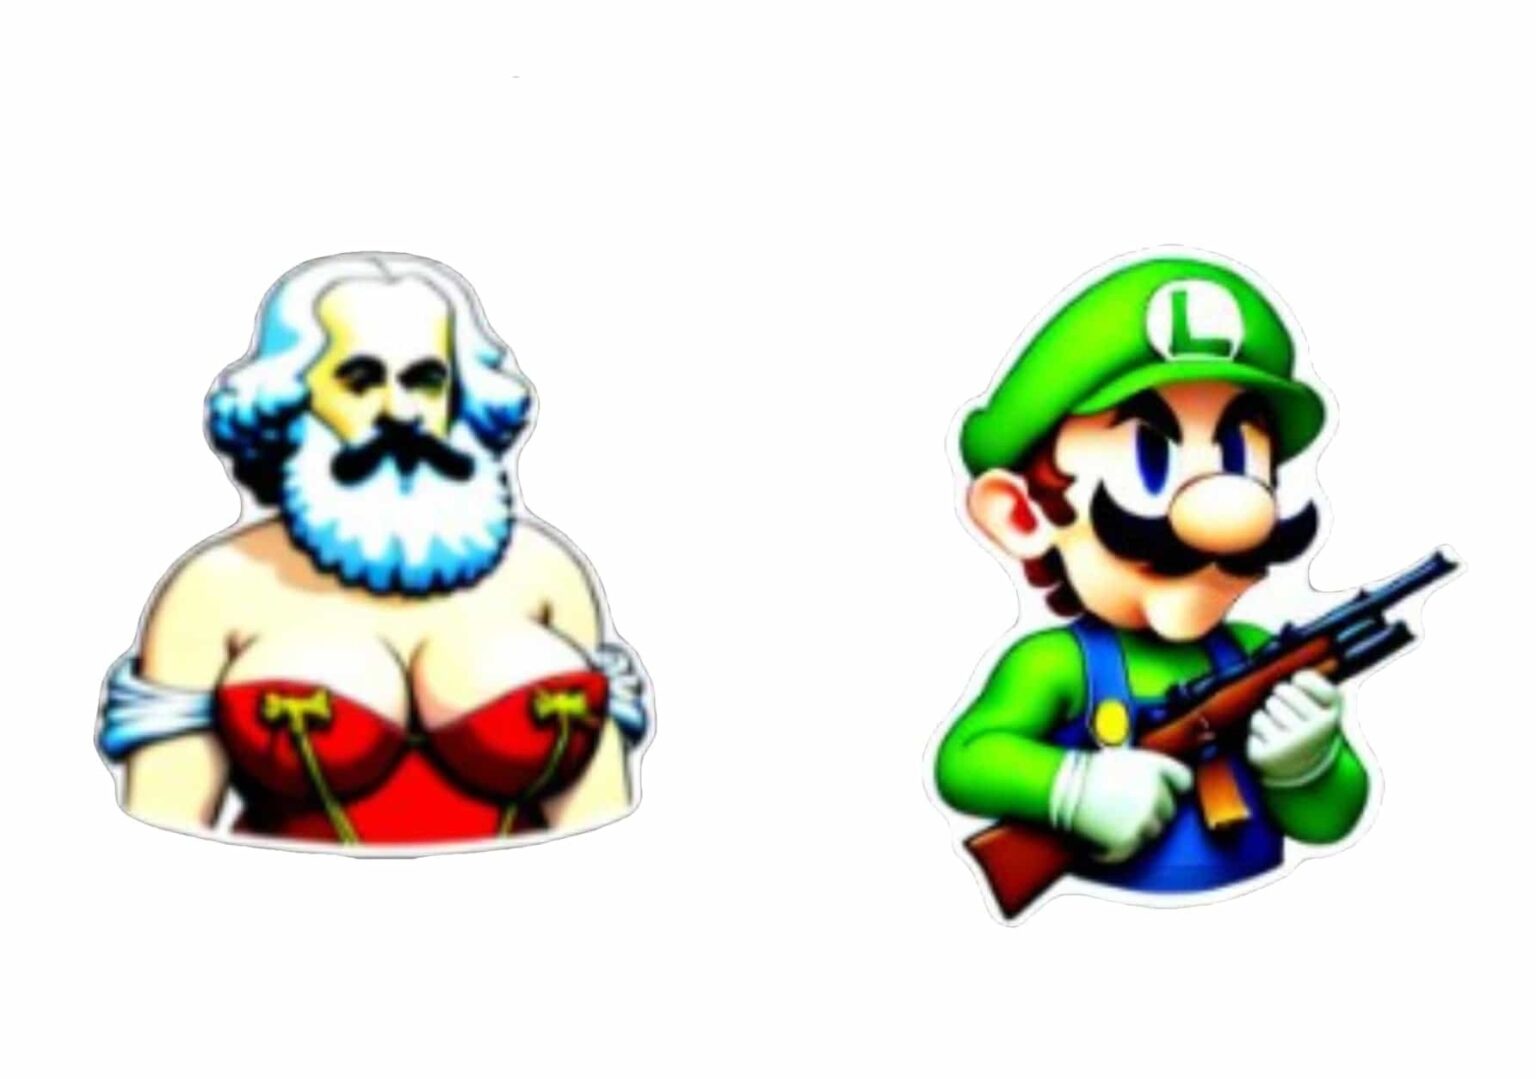 New Meta AI stickers include Marx with Boobs